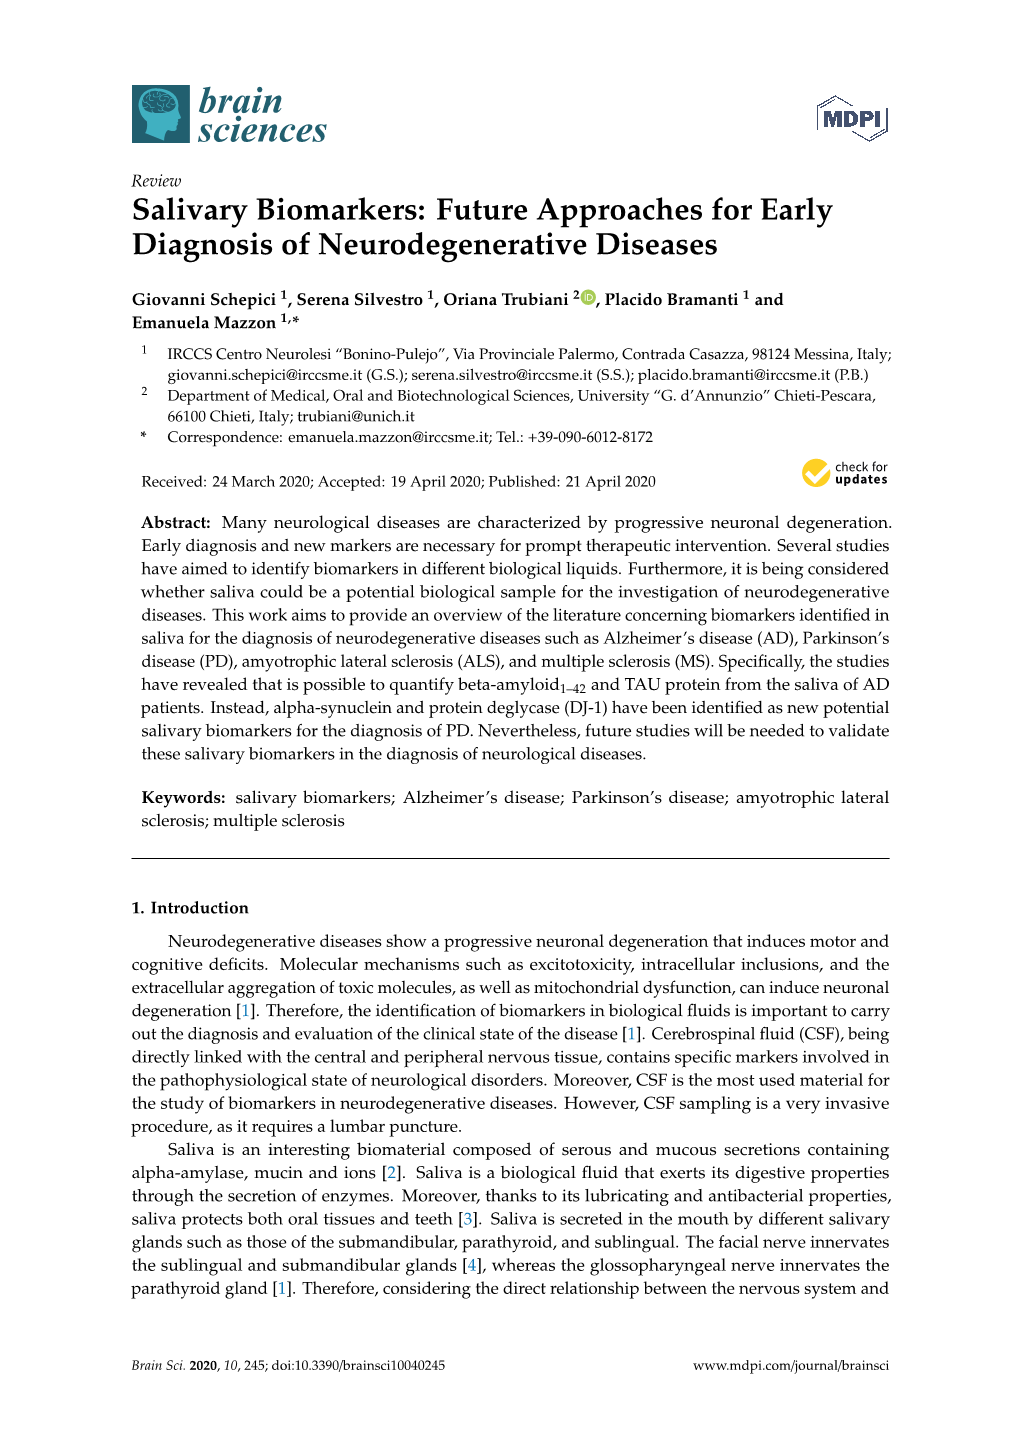 Salivary Biomarkers: Future Approaches for Early Diagnosis of Neurodegenerative Diseases